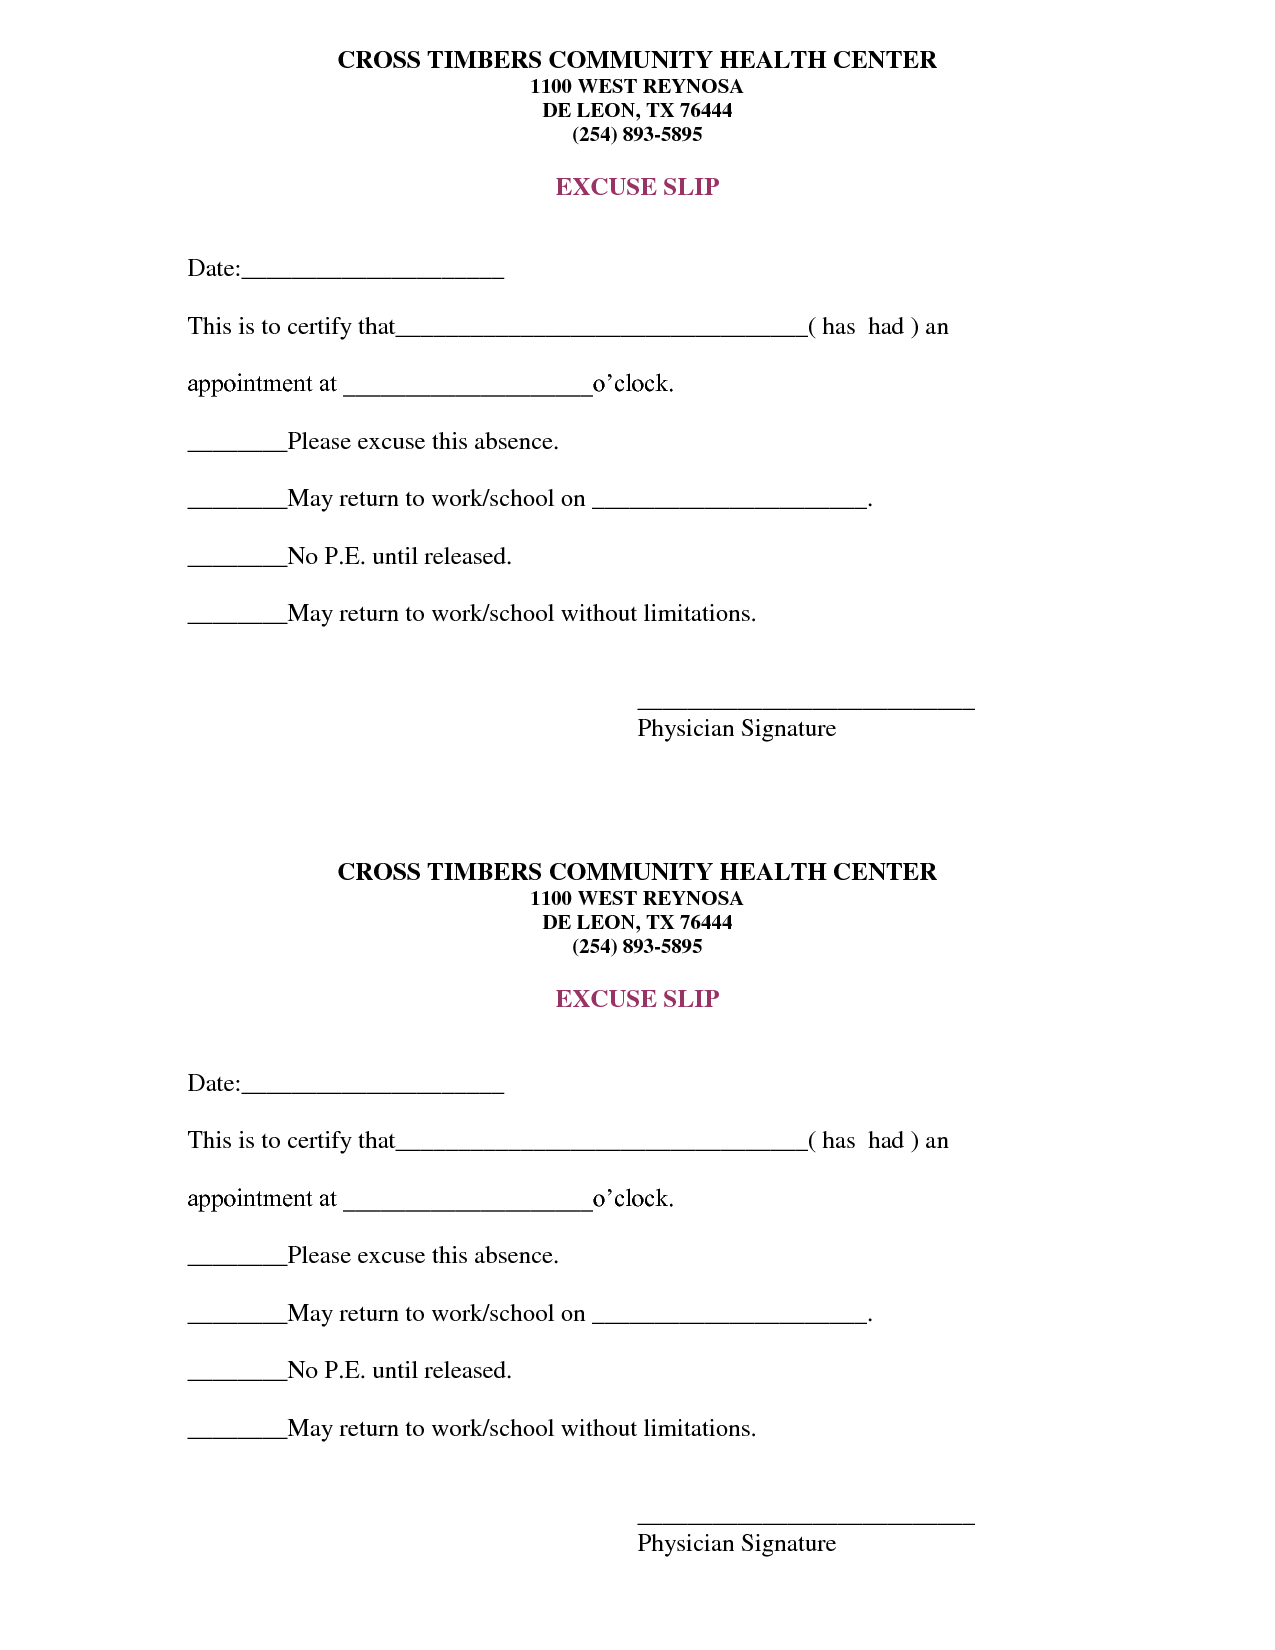 Free Doctors Note Template | Scope Of Work Template | On The Run - Free Printable Doctors Note For Work